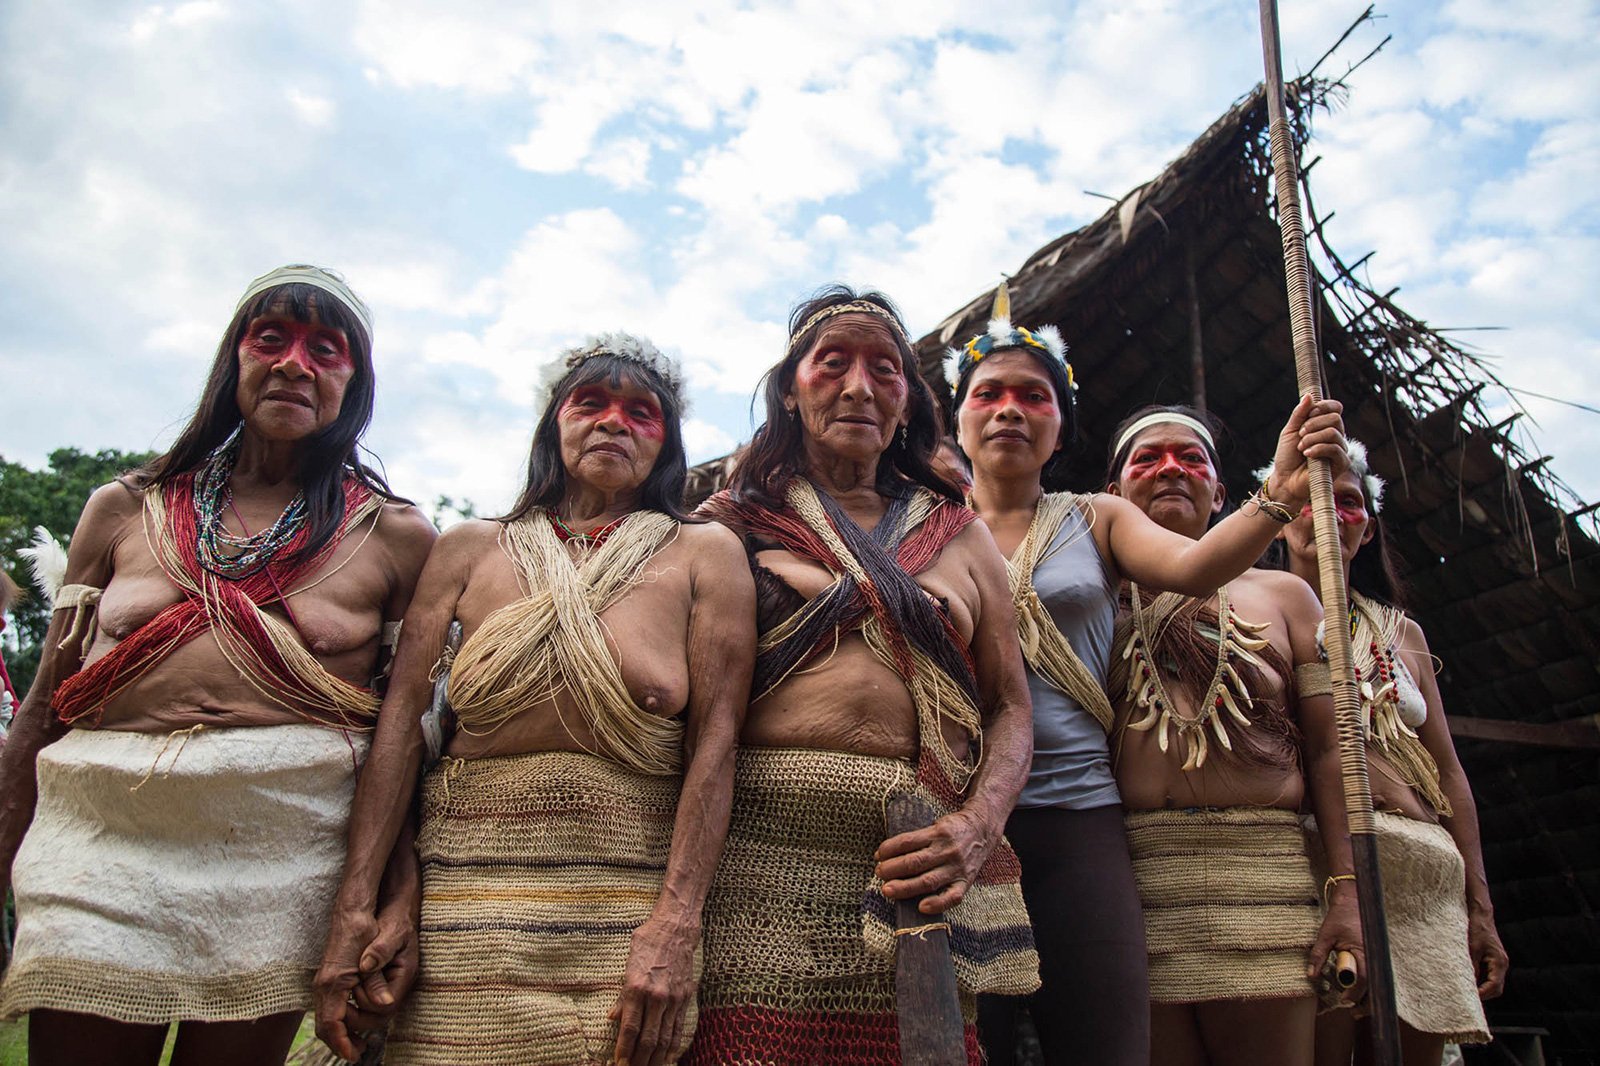 Waorani women of different generations stand together during a historic assembly in their territory in the Pastaza region, Ecuadorian Amazon.